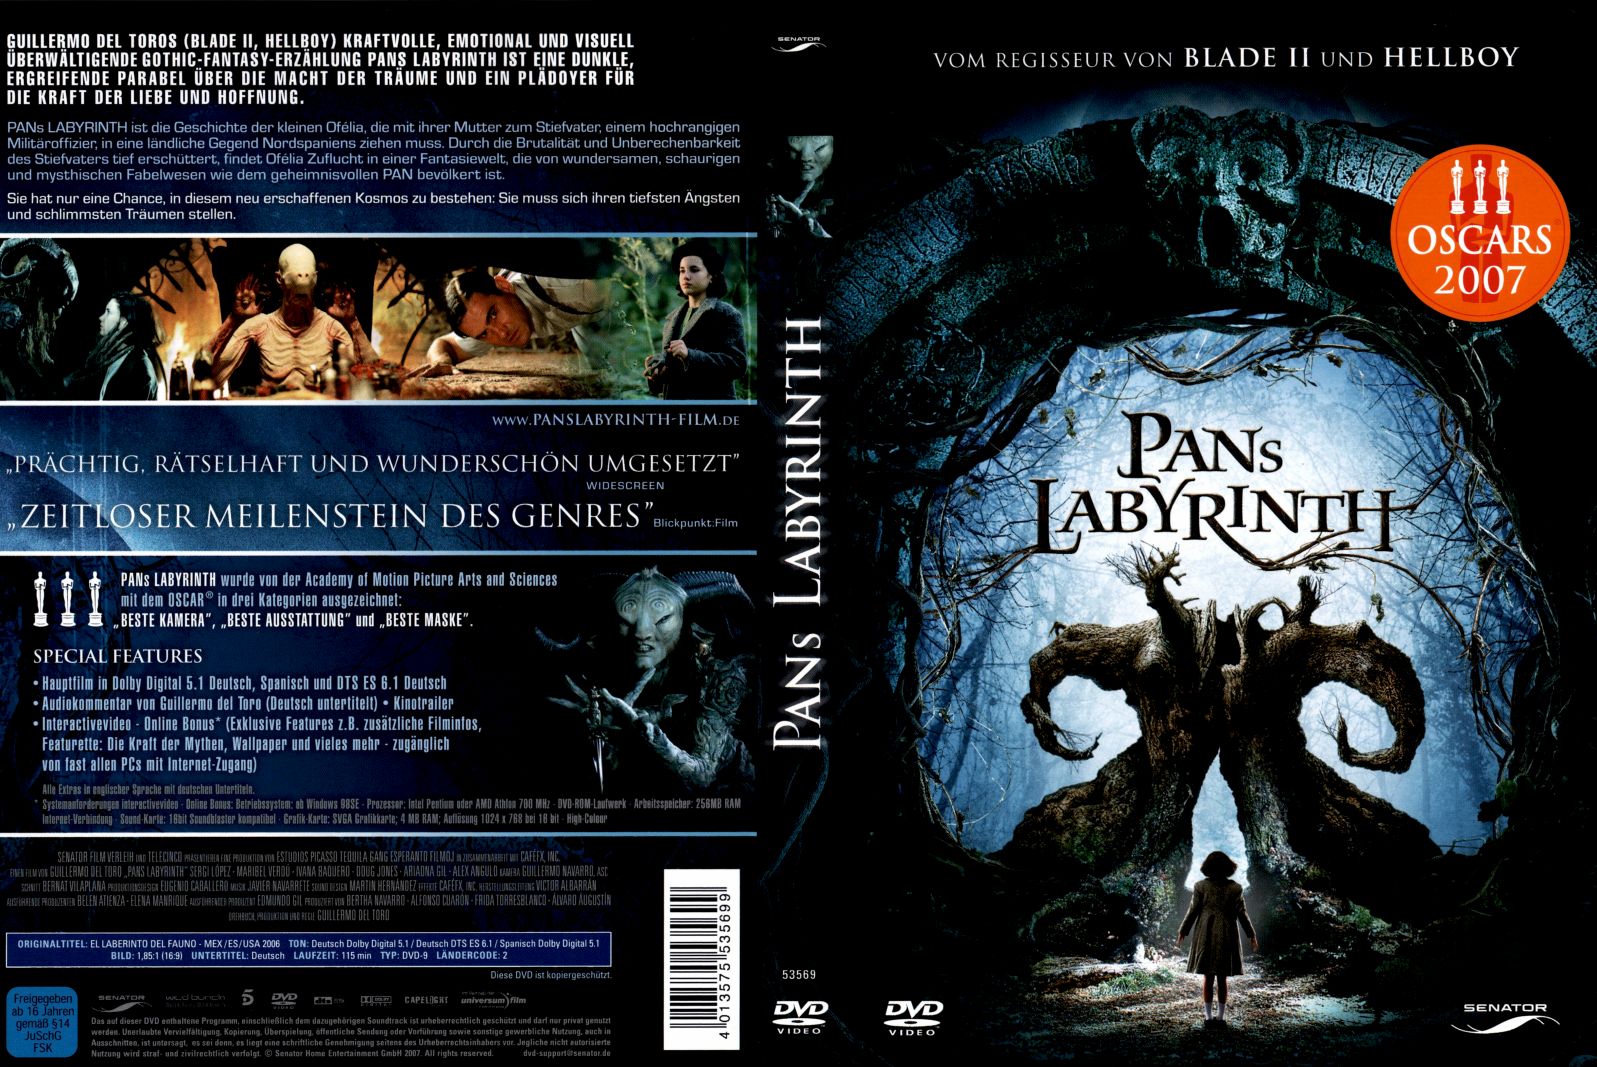 Pans Labyrinth Version 1 Dvd Covers Cover Century Over 500 000 Album Art Covers For Free